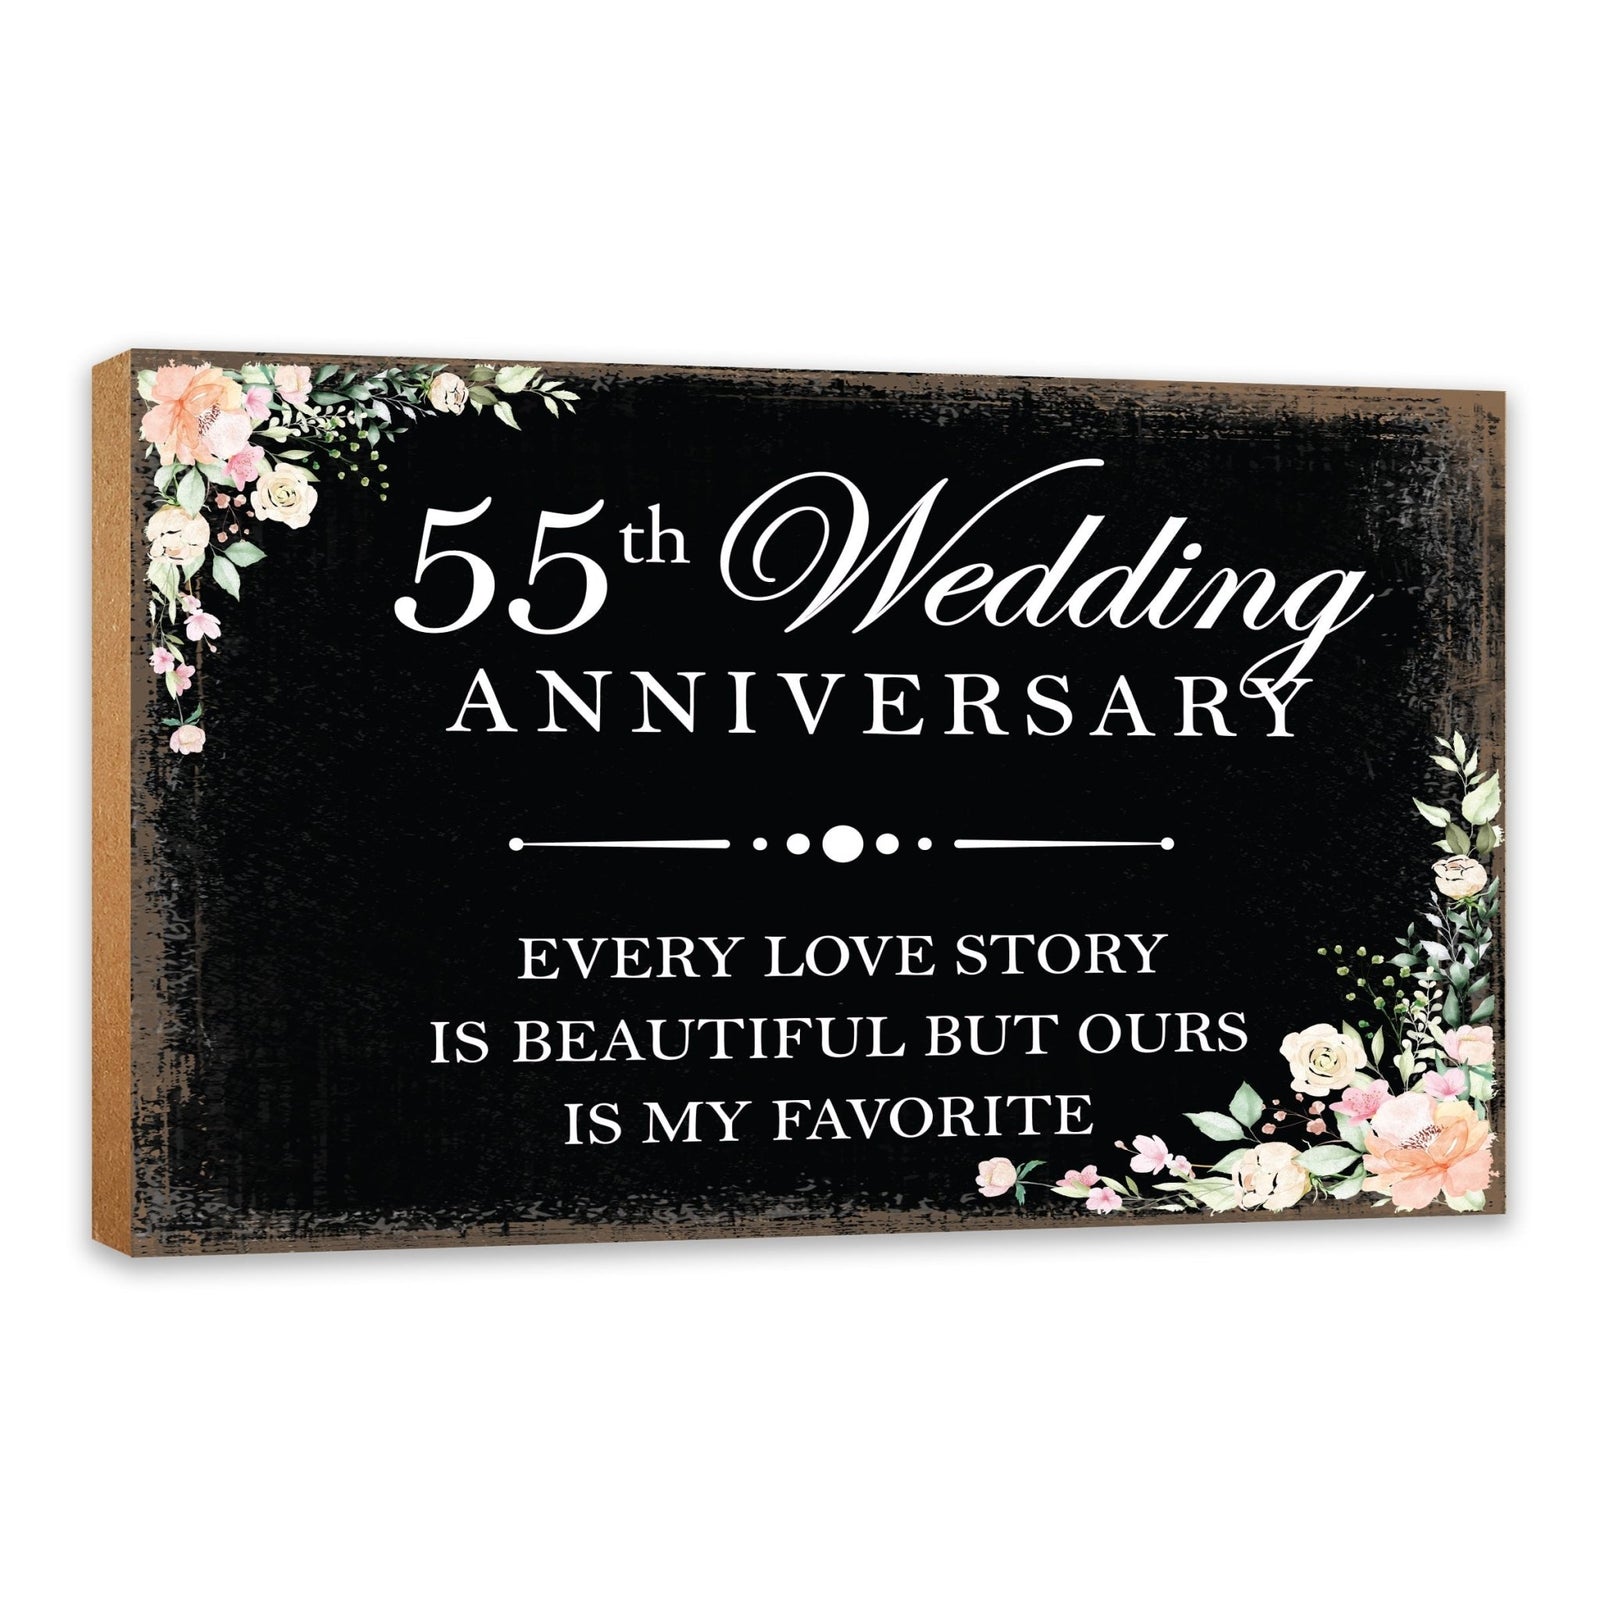 55th Wedding Anniversary Unique Shelf Decor and Tabletop Signs Gifts for Couples - Every Love Story - LifeSong Milestones